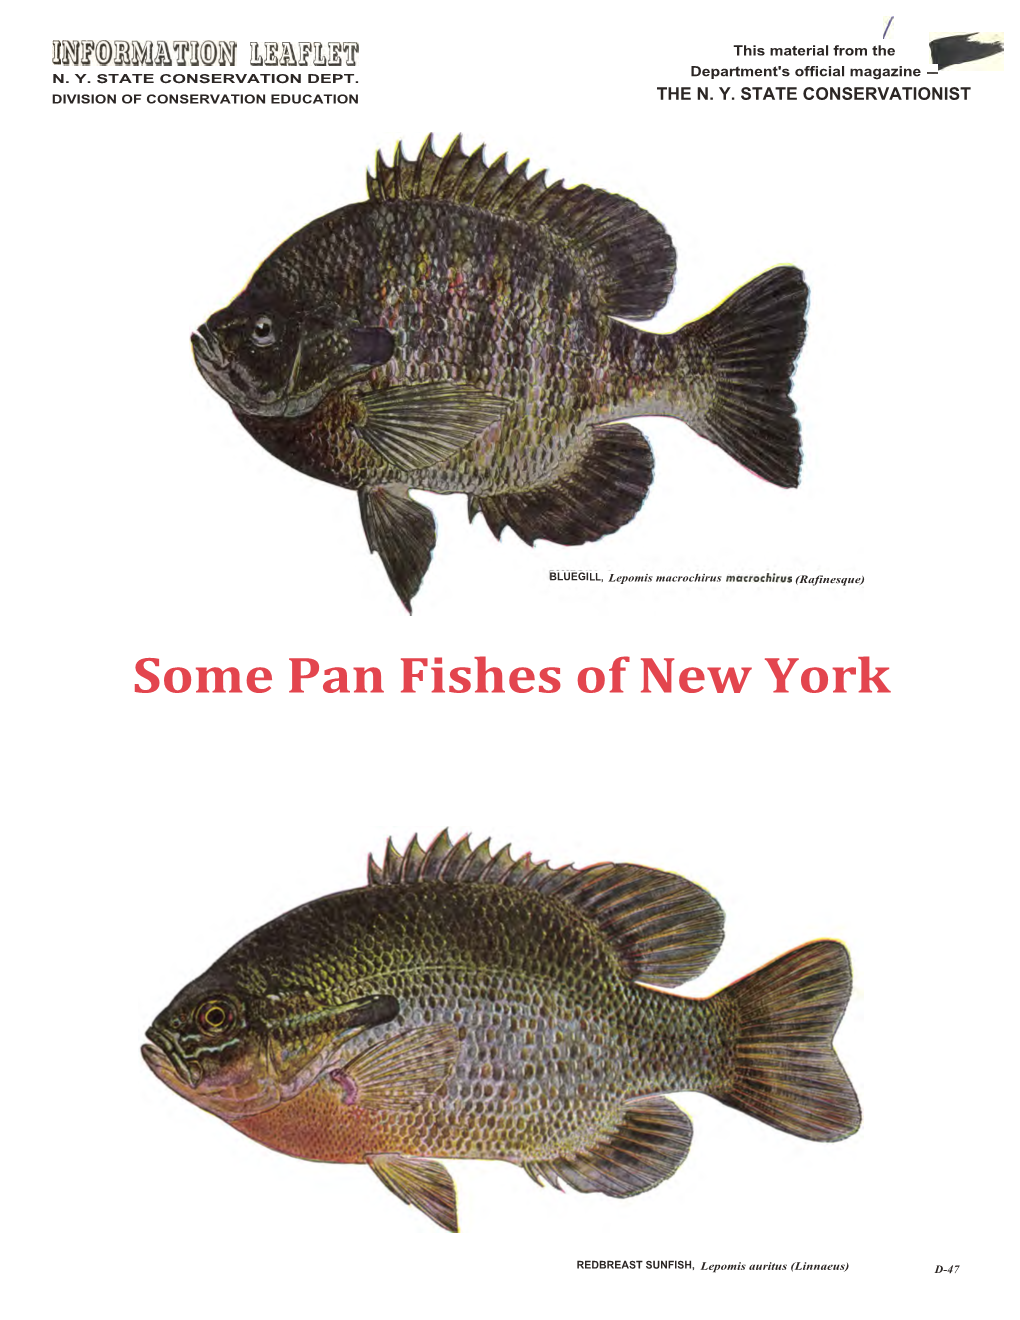 Some Pan Fishes of New York —Rock Bass, Crappies and Other Sunfishes